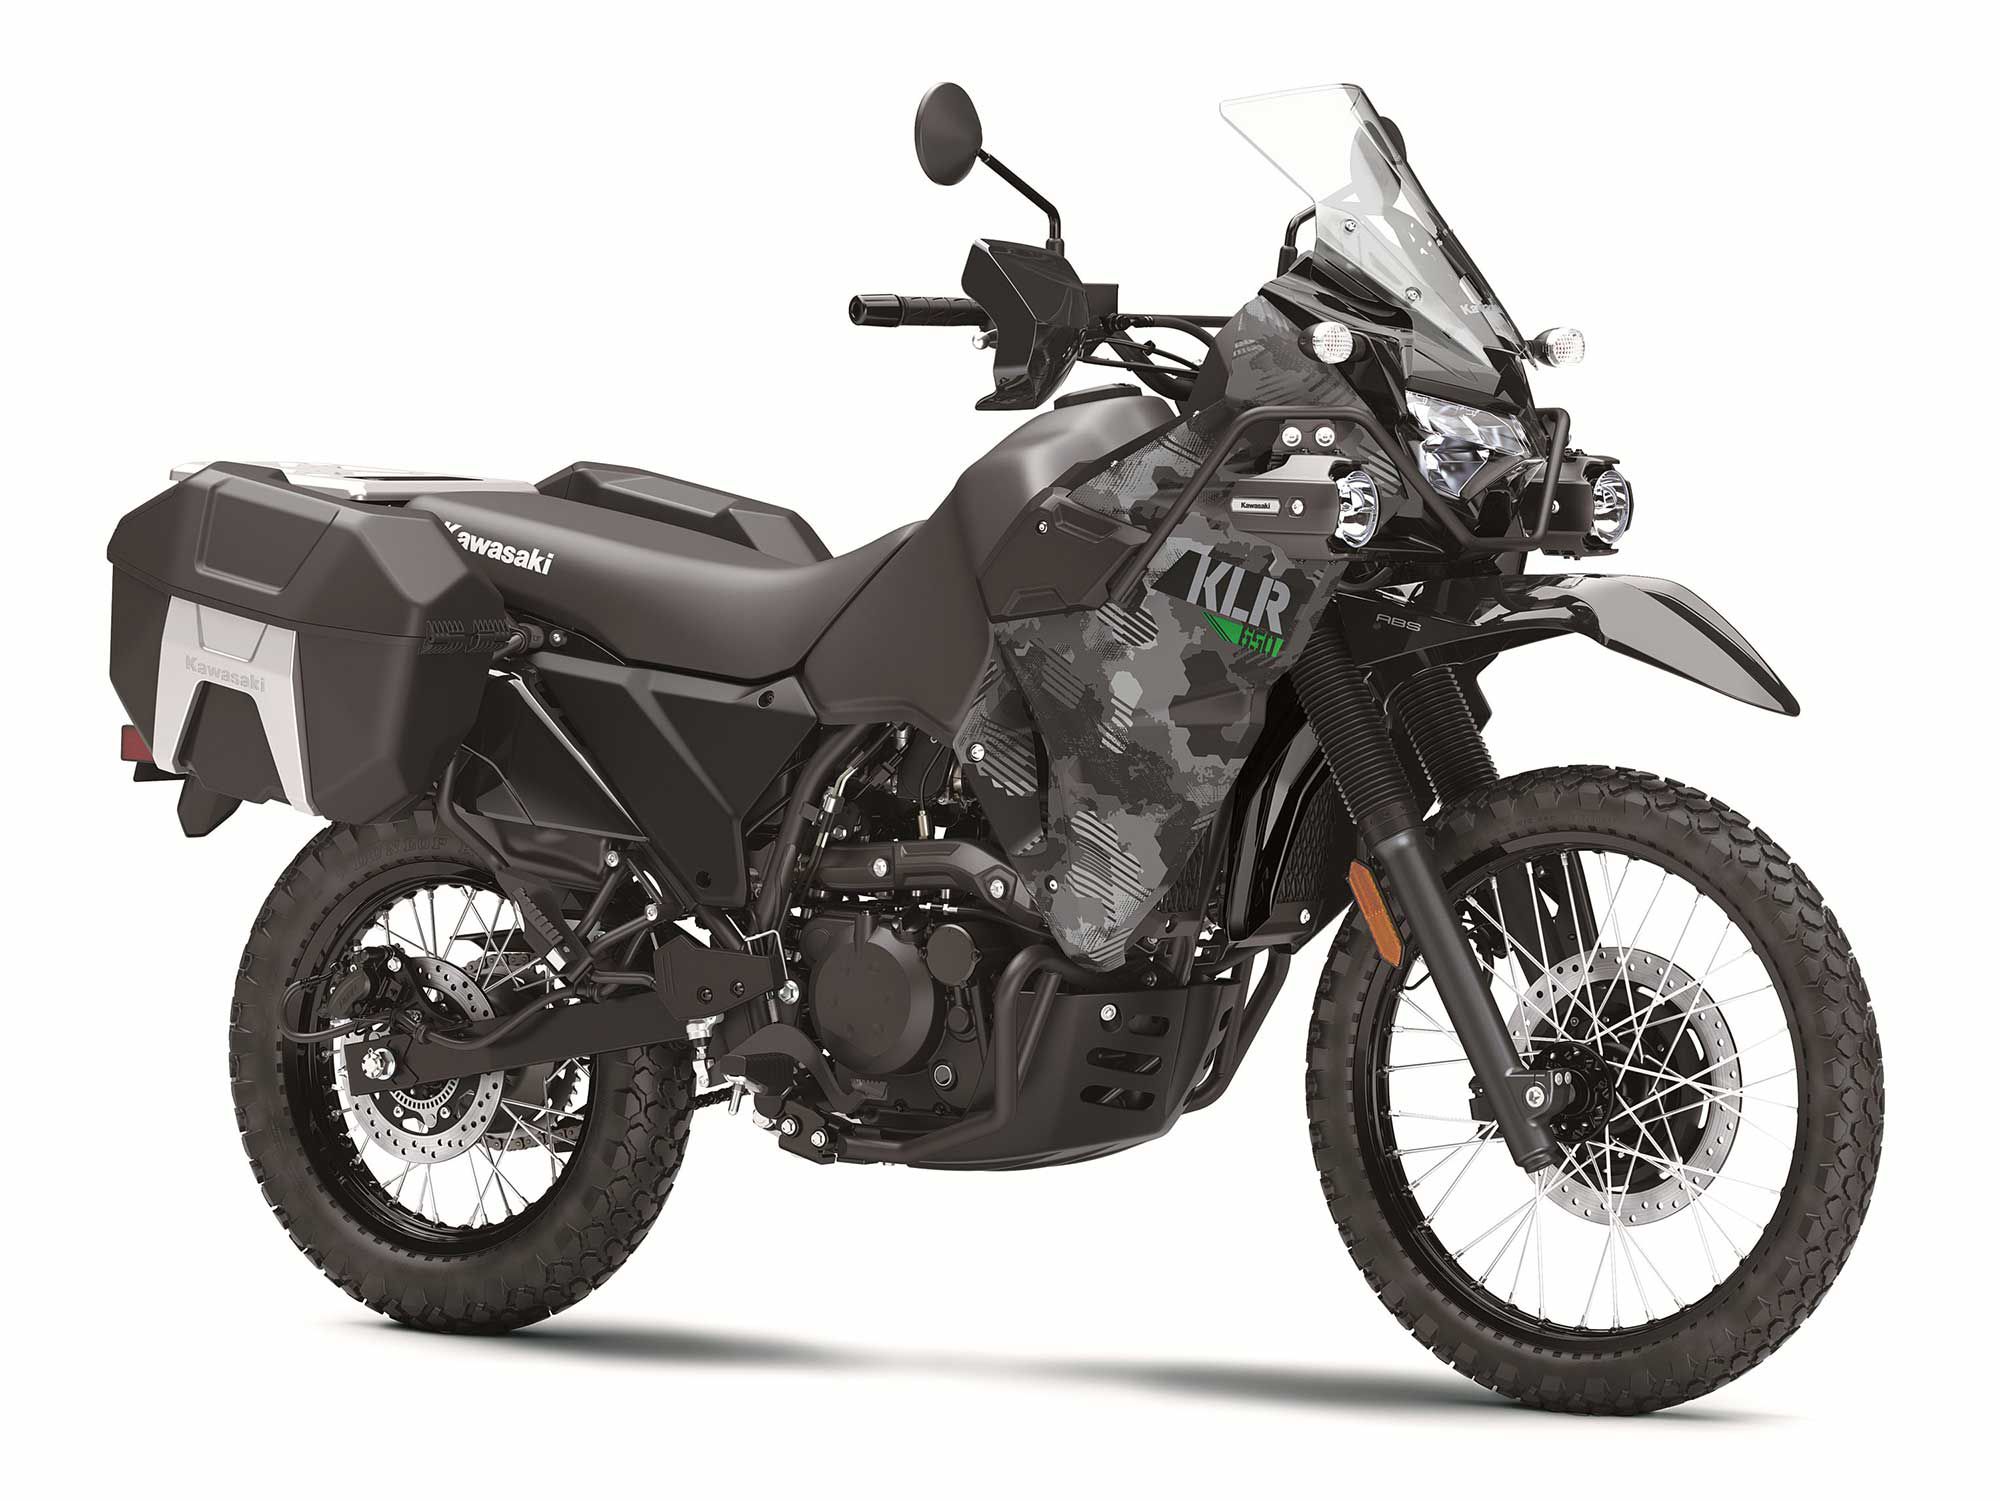 The KLR650 Adventure comes in Camo Cypher Gray, regardless of choice of ABS.